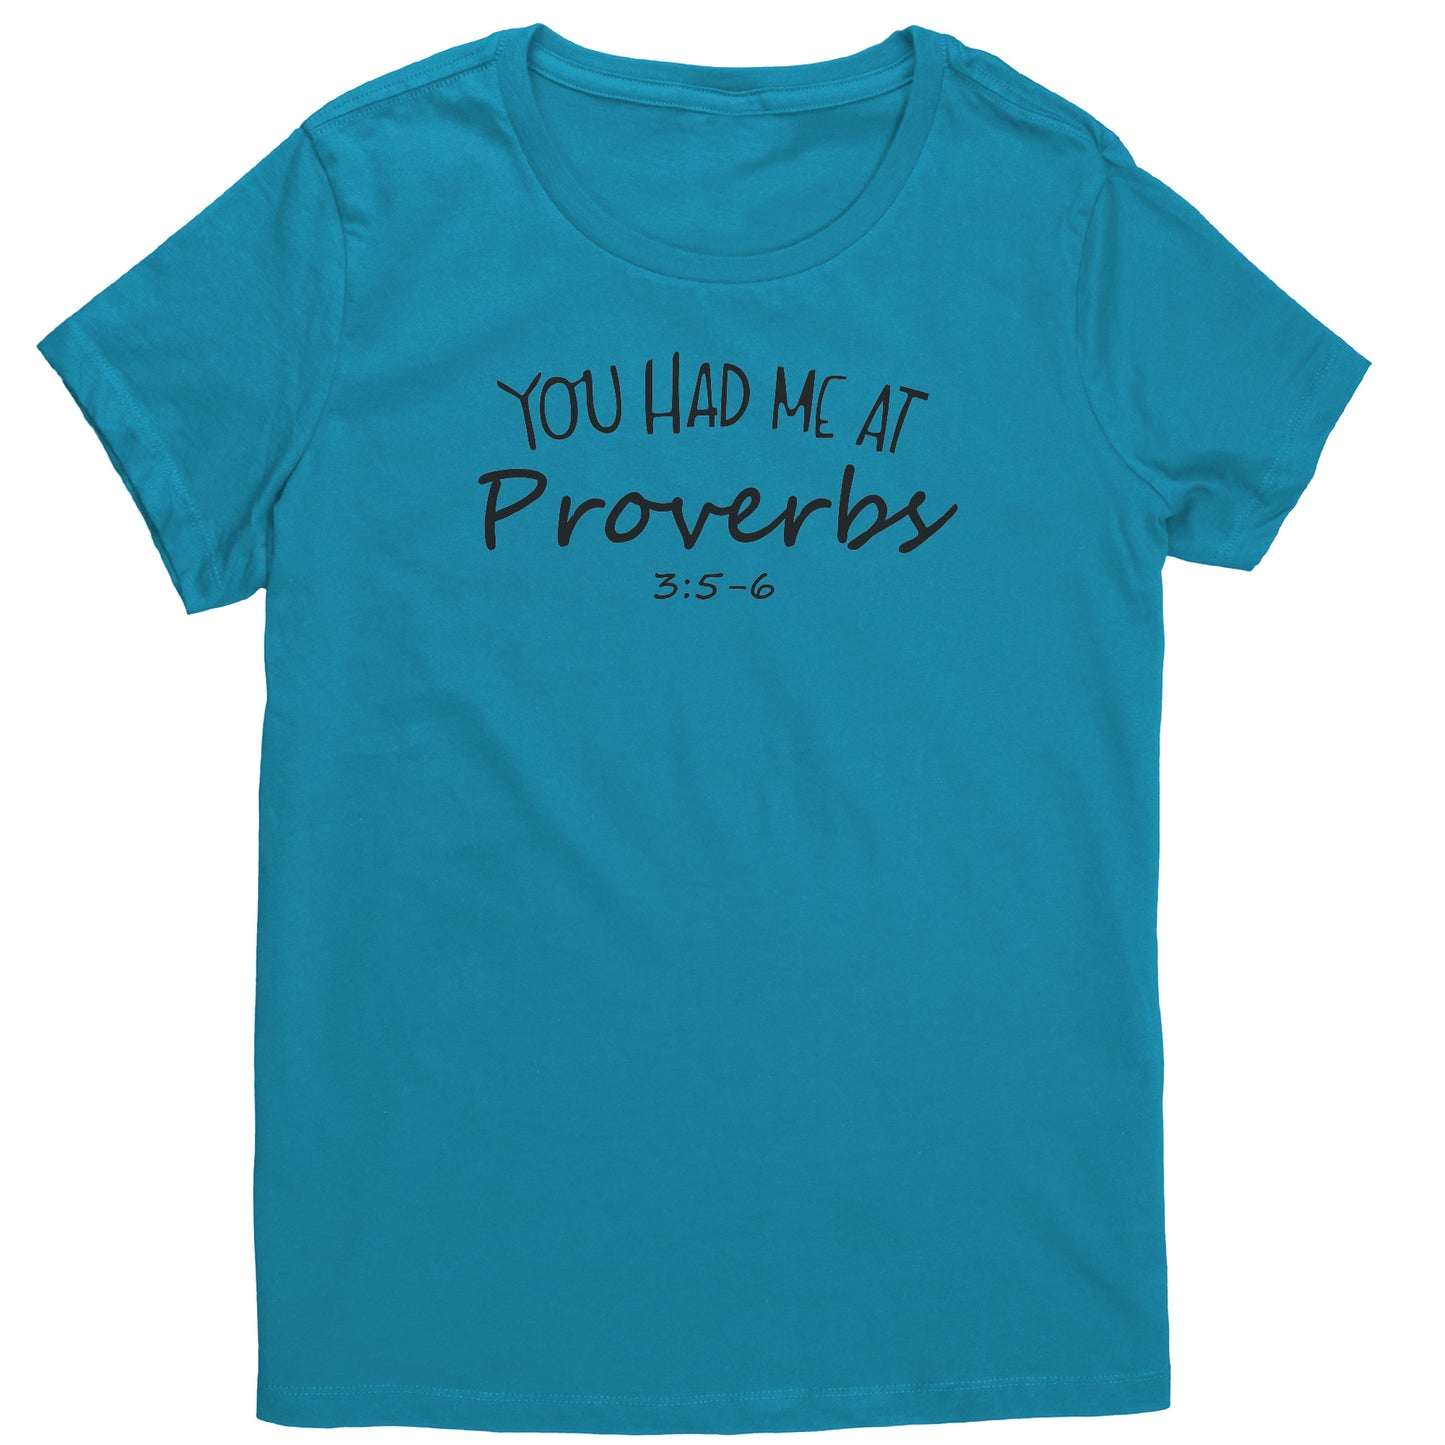 You Had Me At Proverbs 3:5-6 Women's T-Shirt Part 1